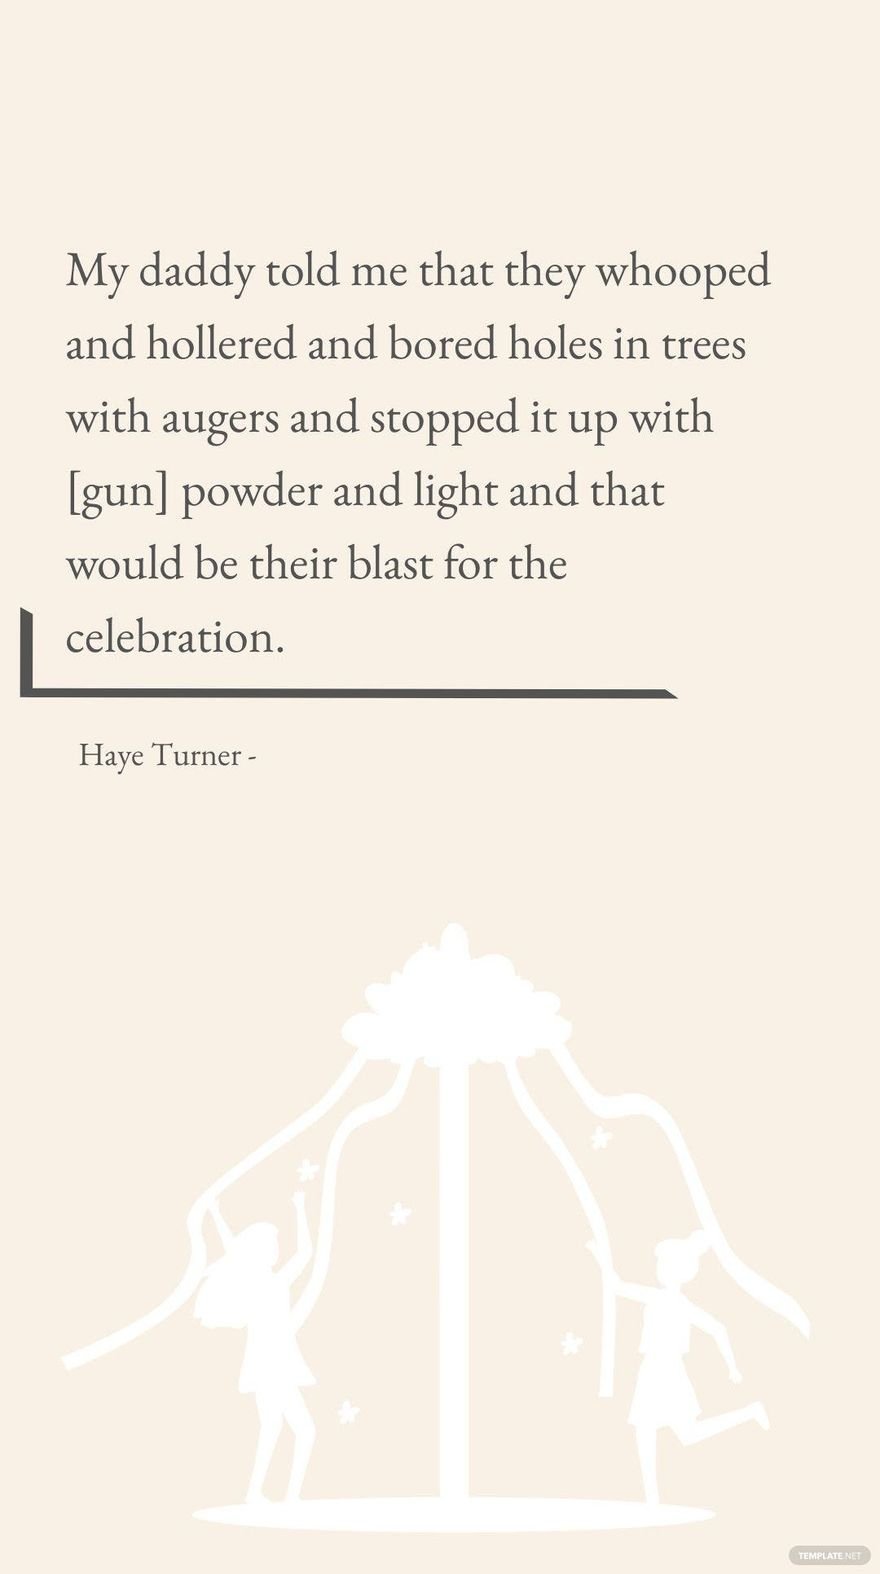 Free Haye Turner - My daddy told me that they whooped and hollered and bored holes in trees with augers and stopped it up with [gun] powder and light and that would be their blast for the celebration. in JPG